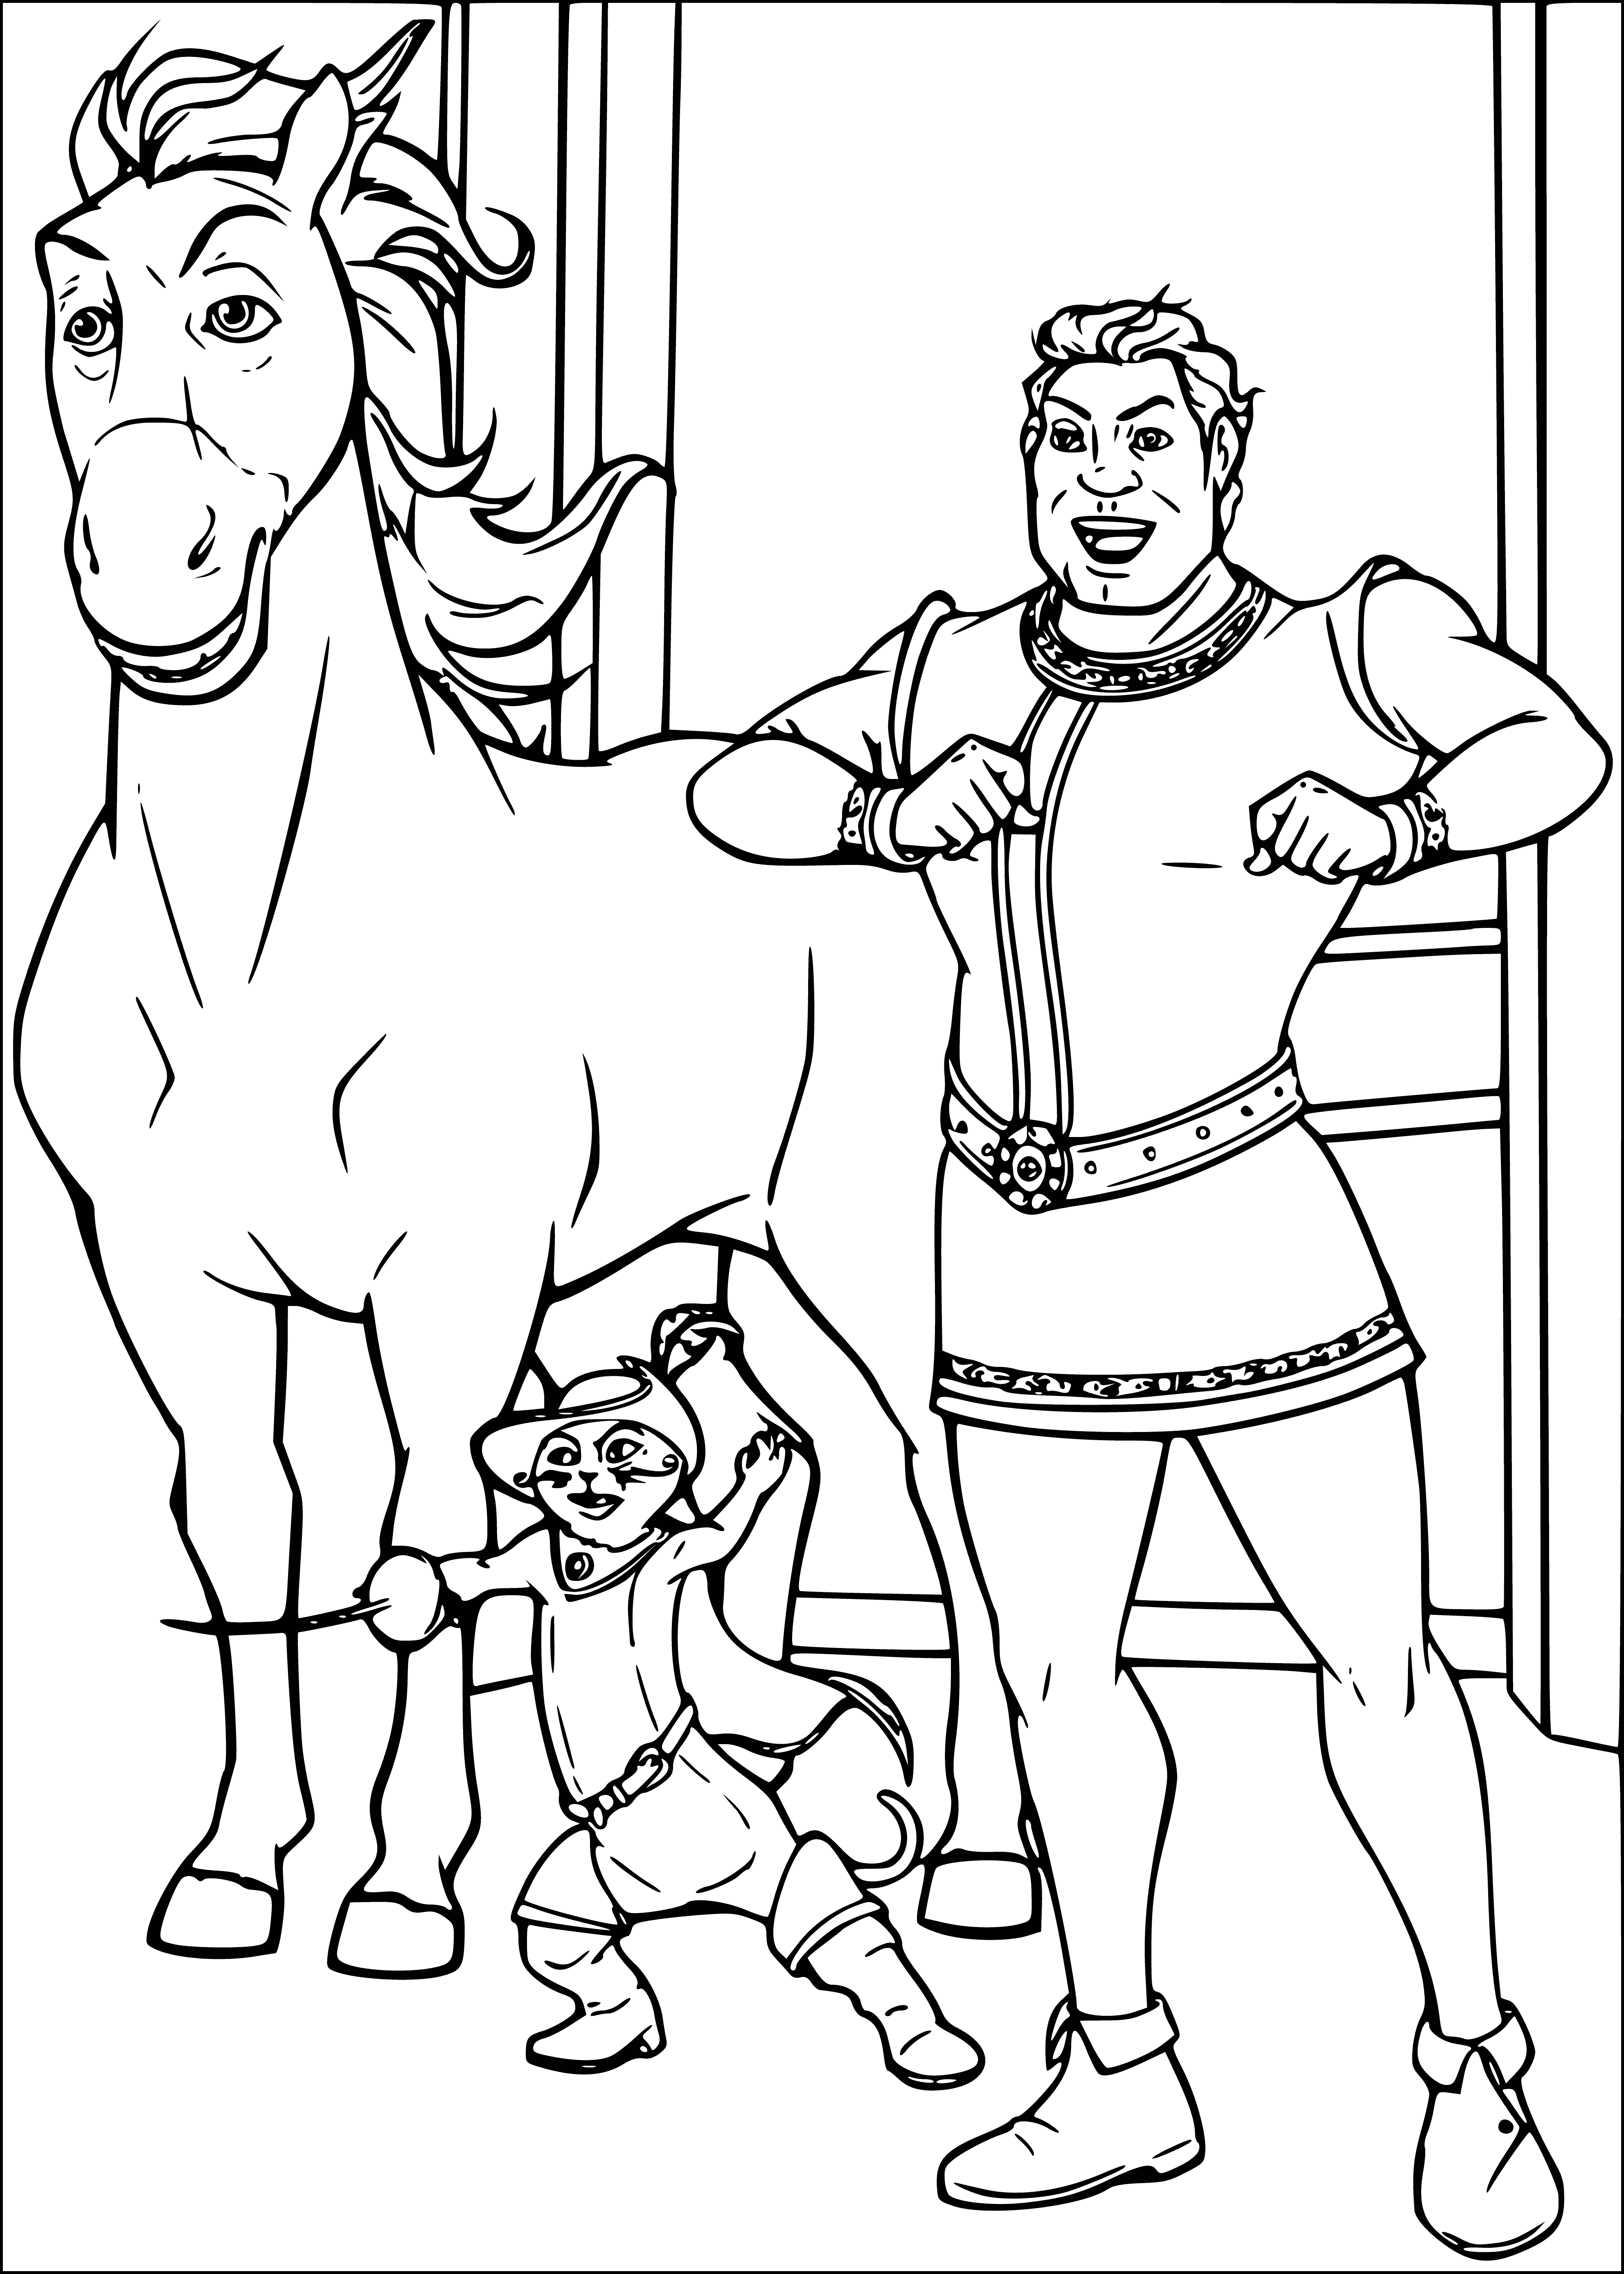 coloring page: Shrek, Fiona, and Donkey explore a castle, meeting many characters and gazing at something mysterious.